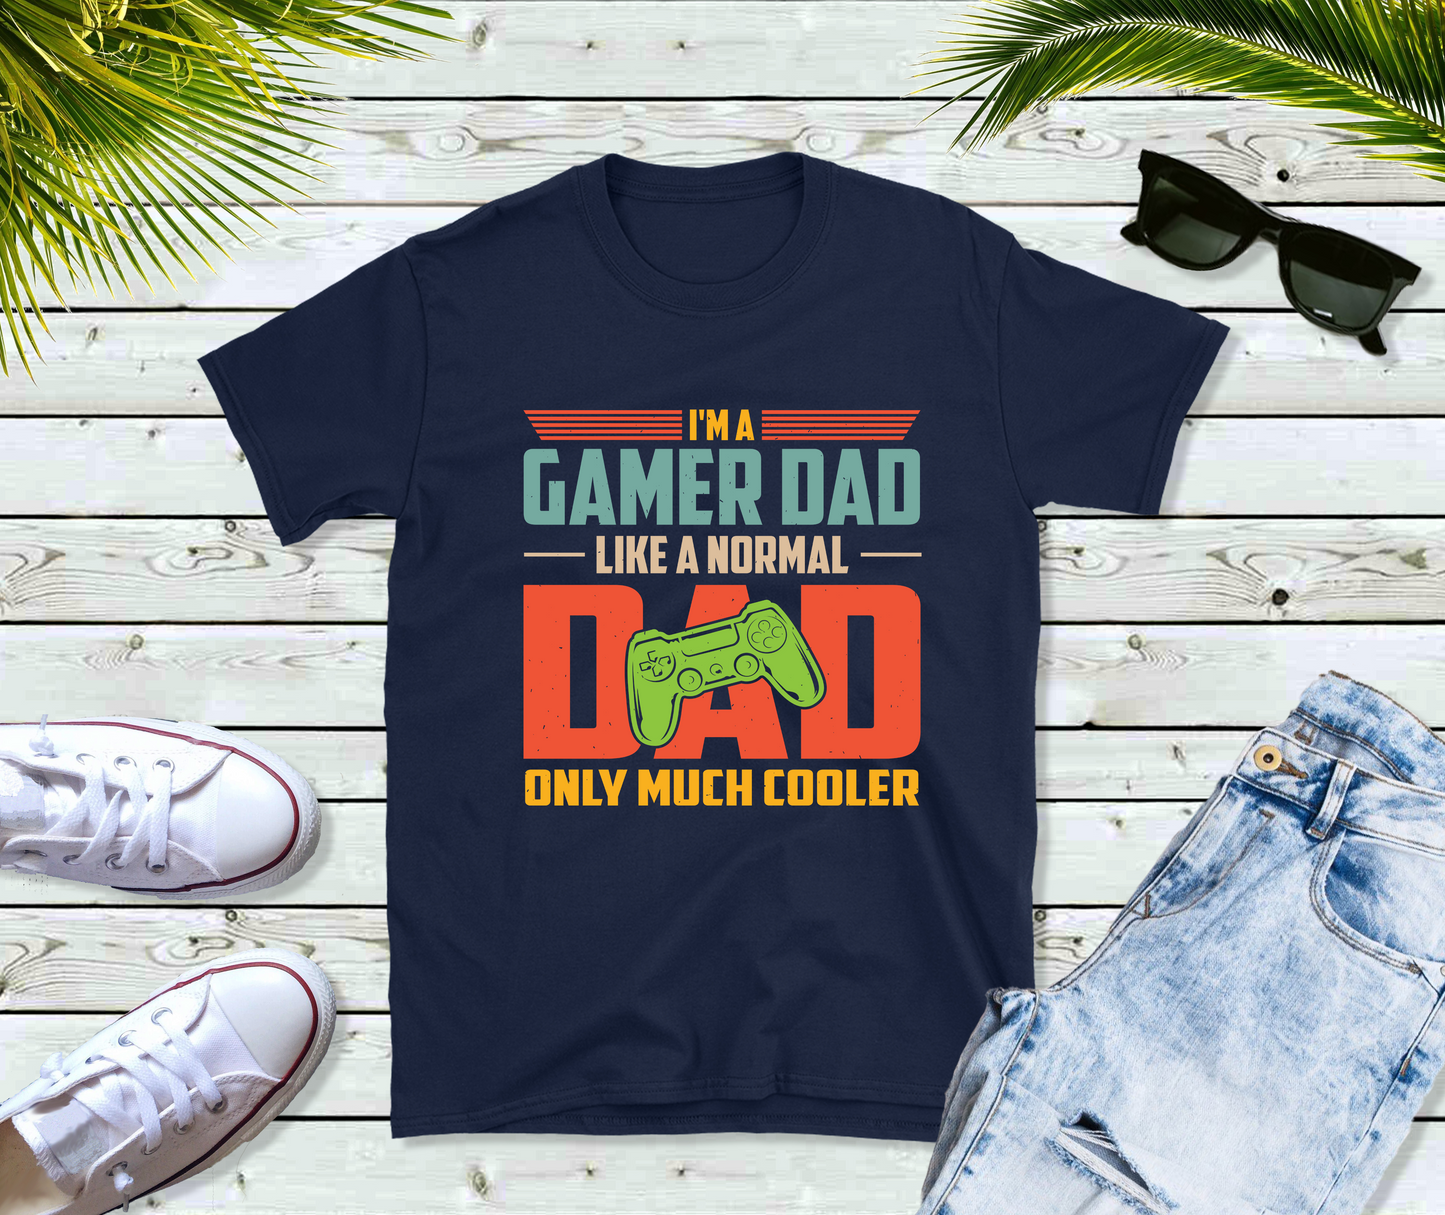 I'm a Gamer Dad Like a Normal Dad Only Much Cooler Shirt, Gamer Dad Shirt, Birthday Gift, Father's Day Gift, Cute Game Tshirt